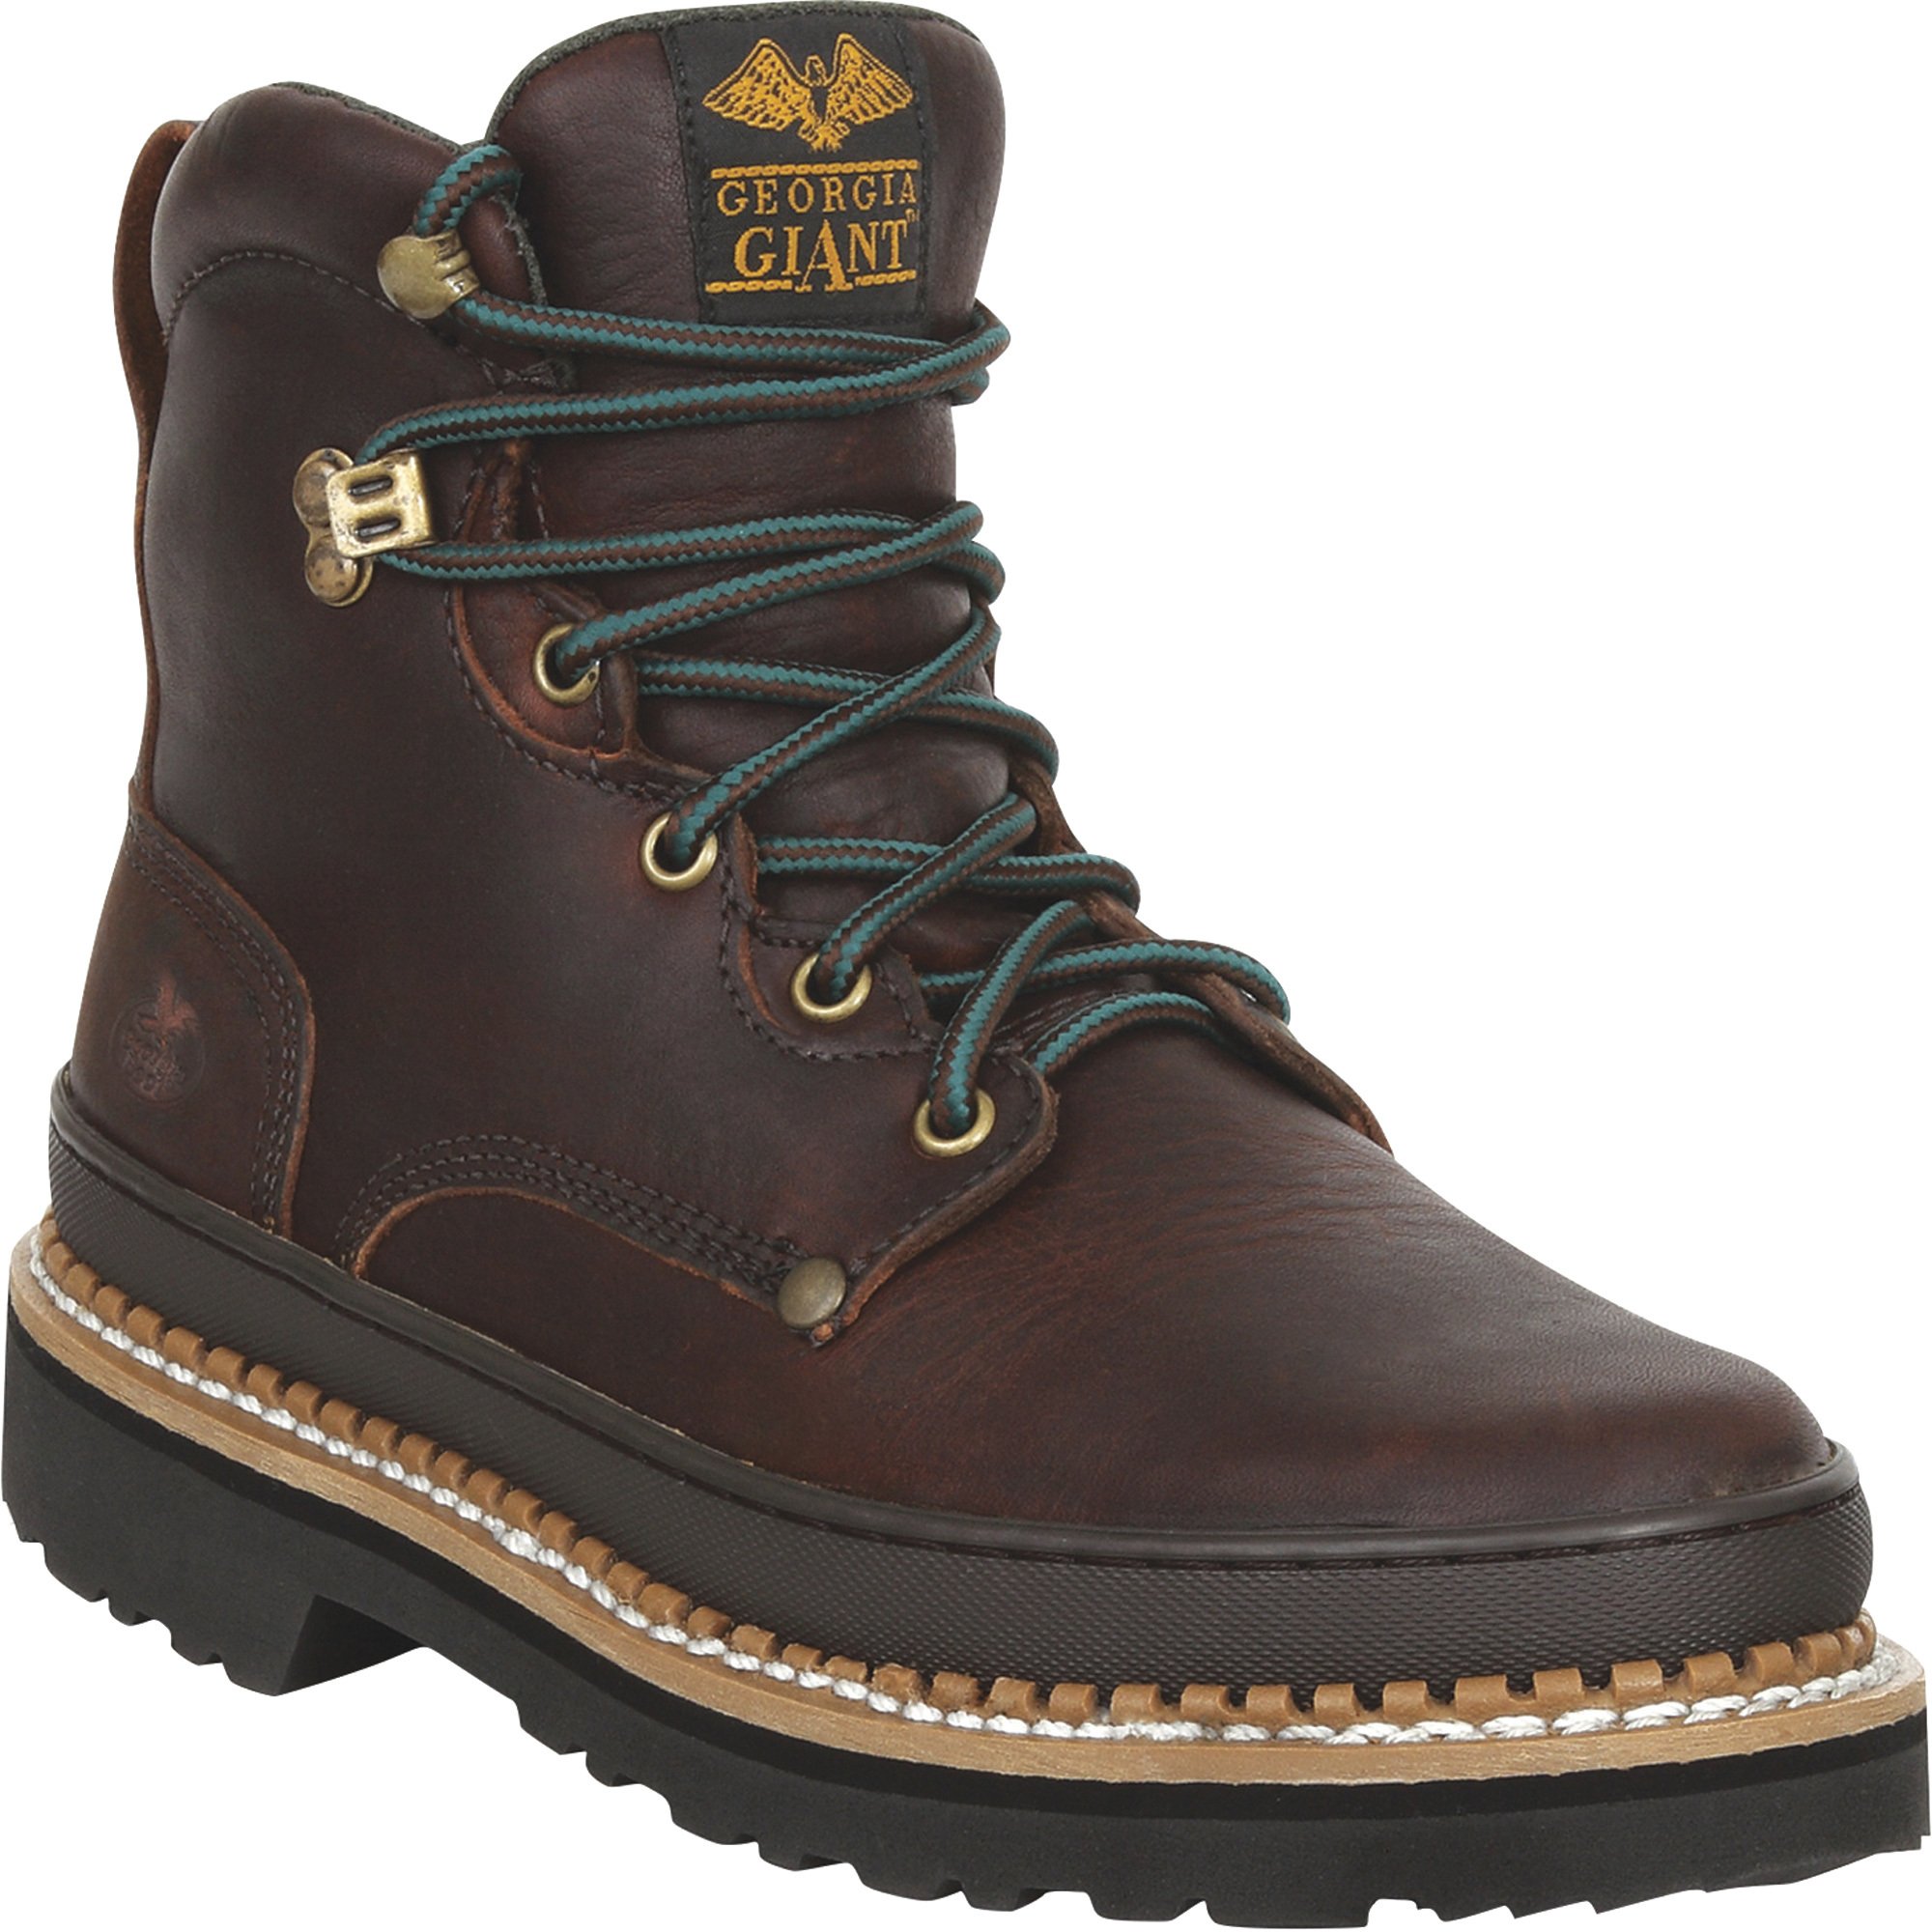 Georgia Giant Men's 6in. Work Boots — Brown, Soft Toe | Northern Tool